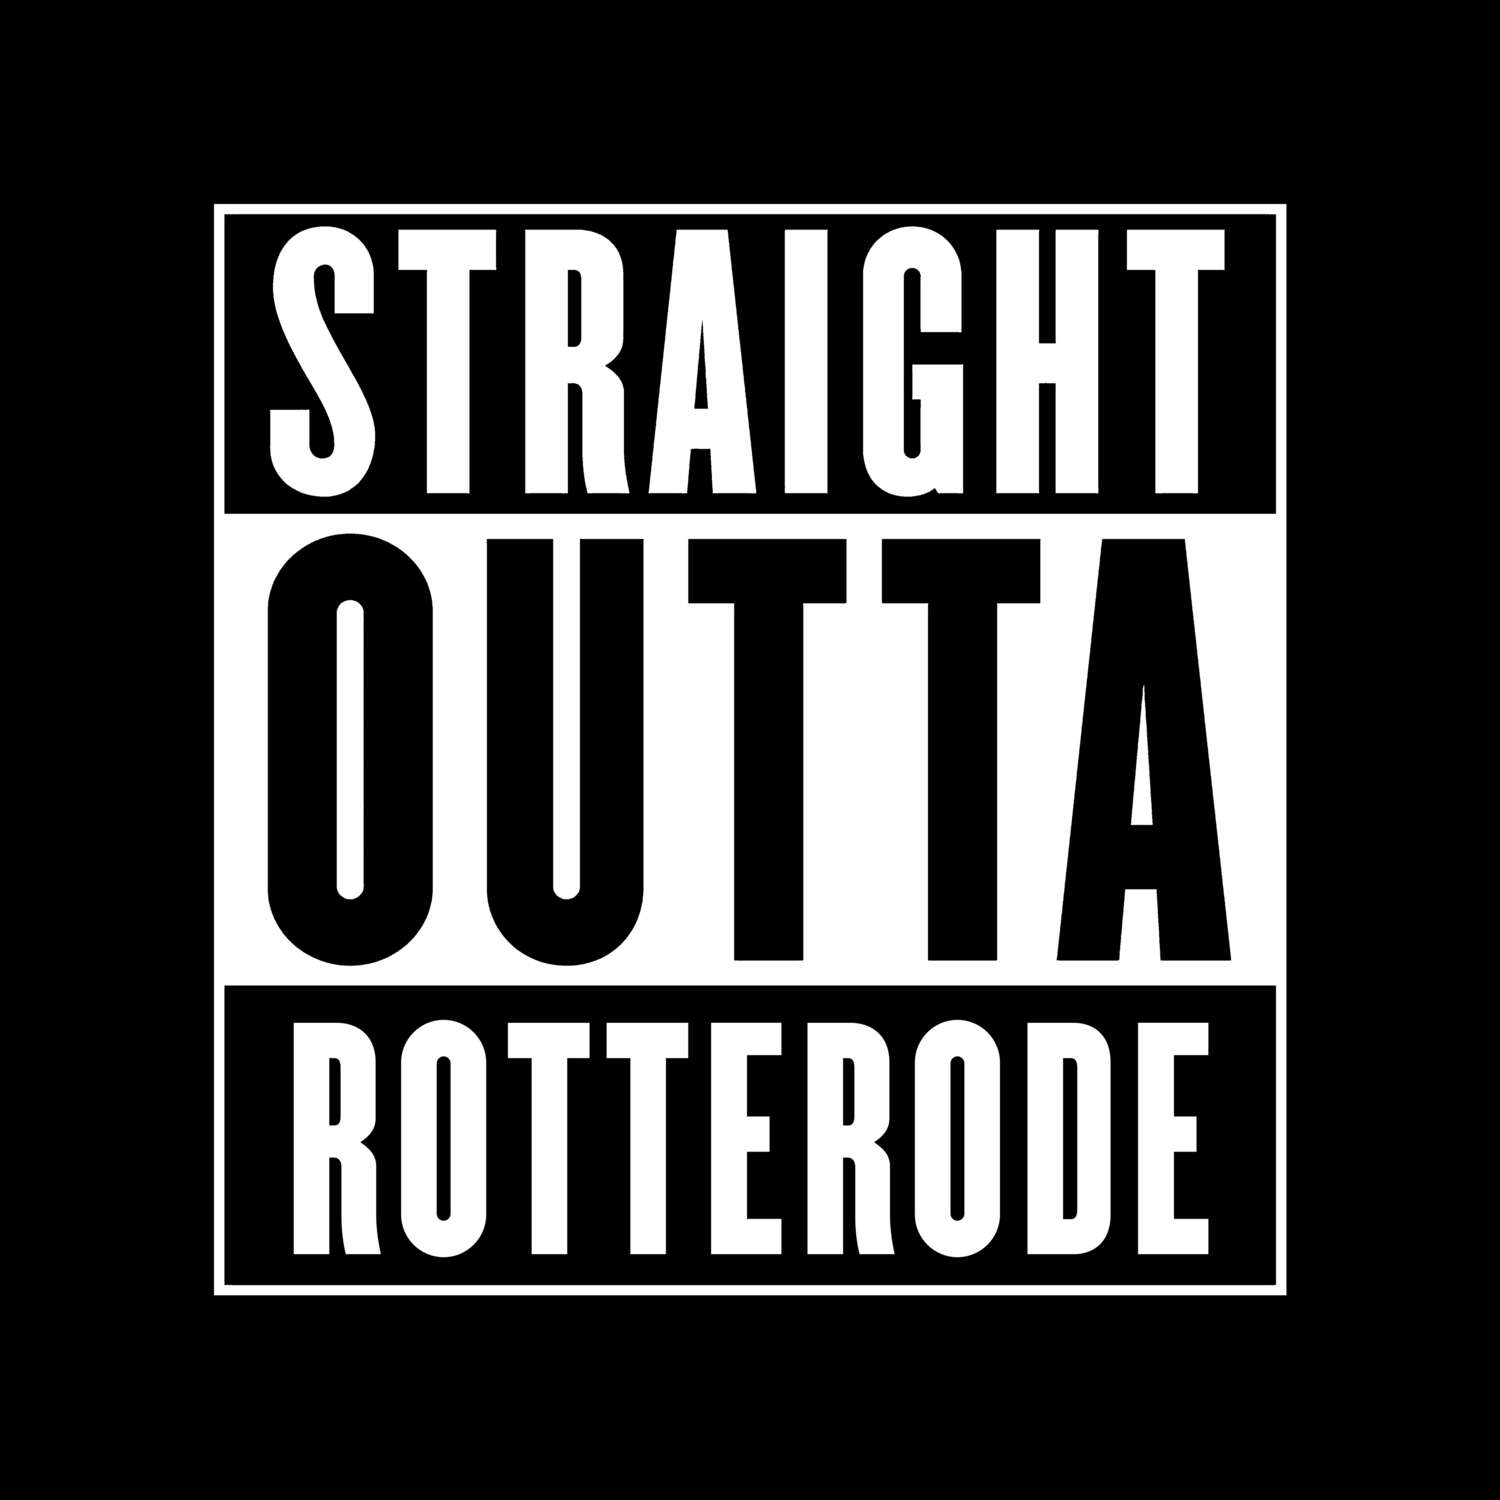 Rotterode T-Shirt »Straight Outta«